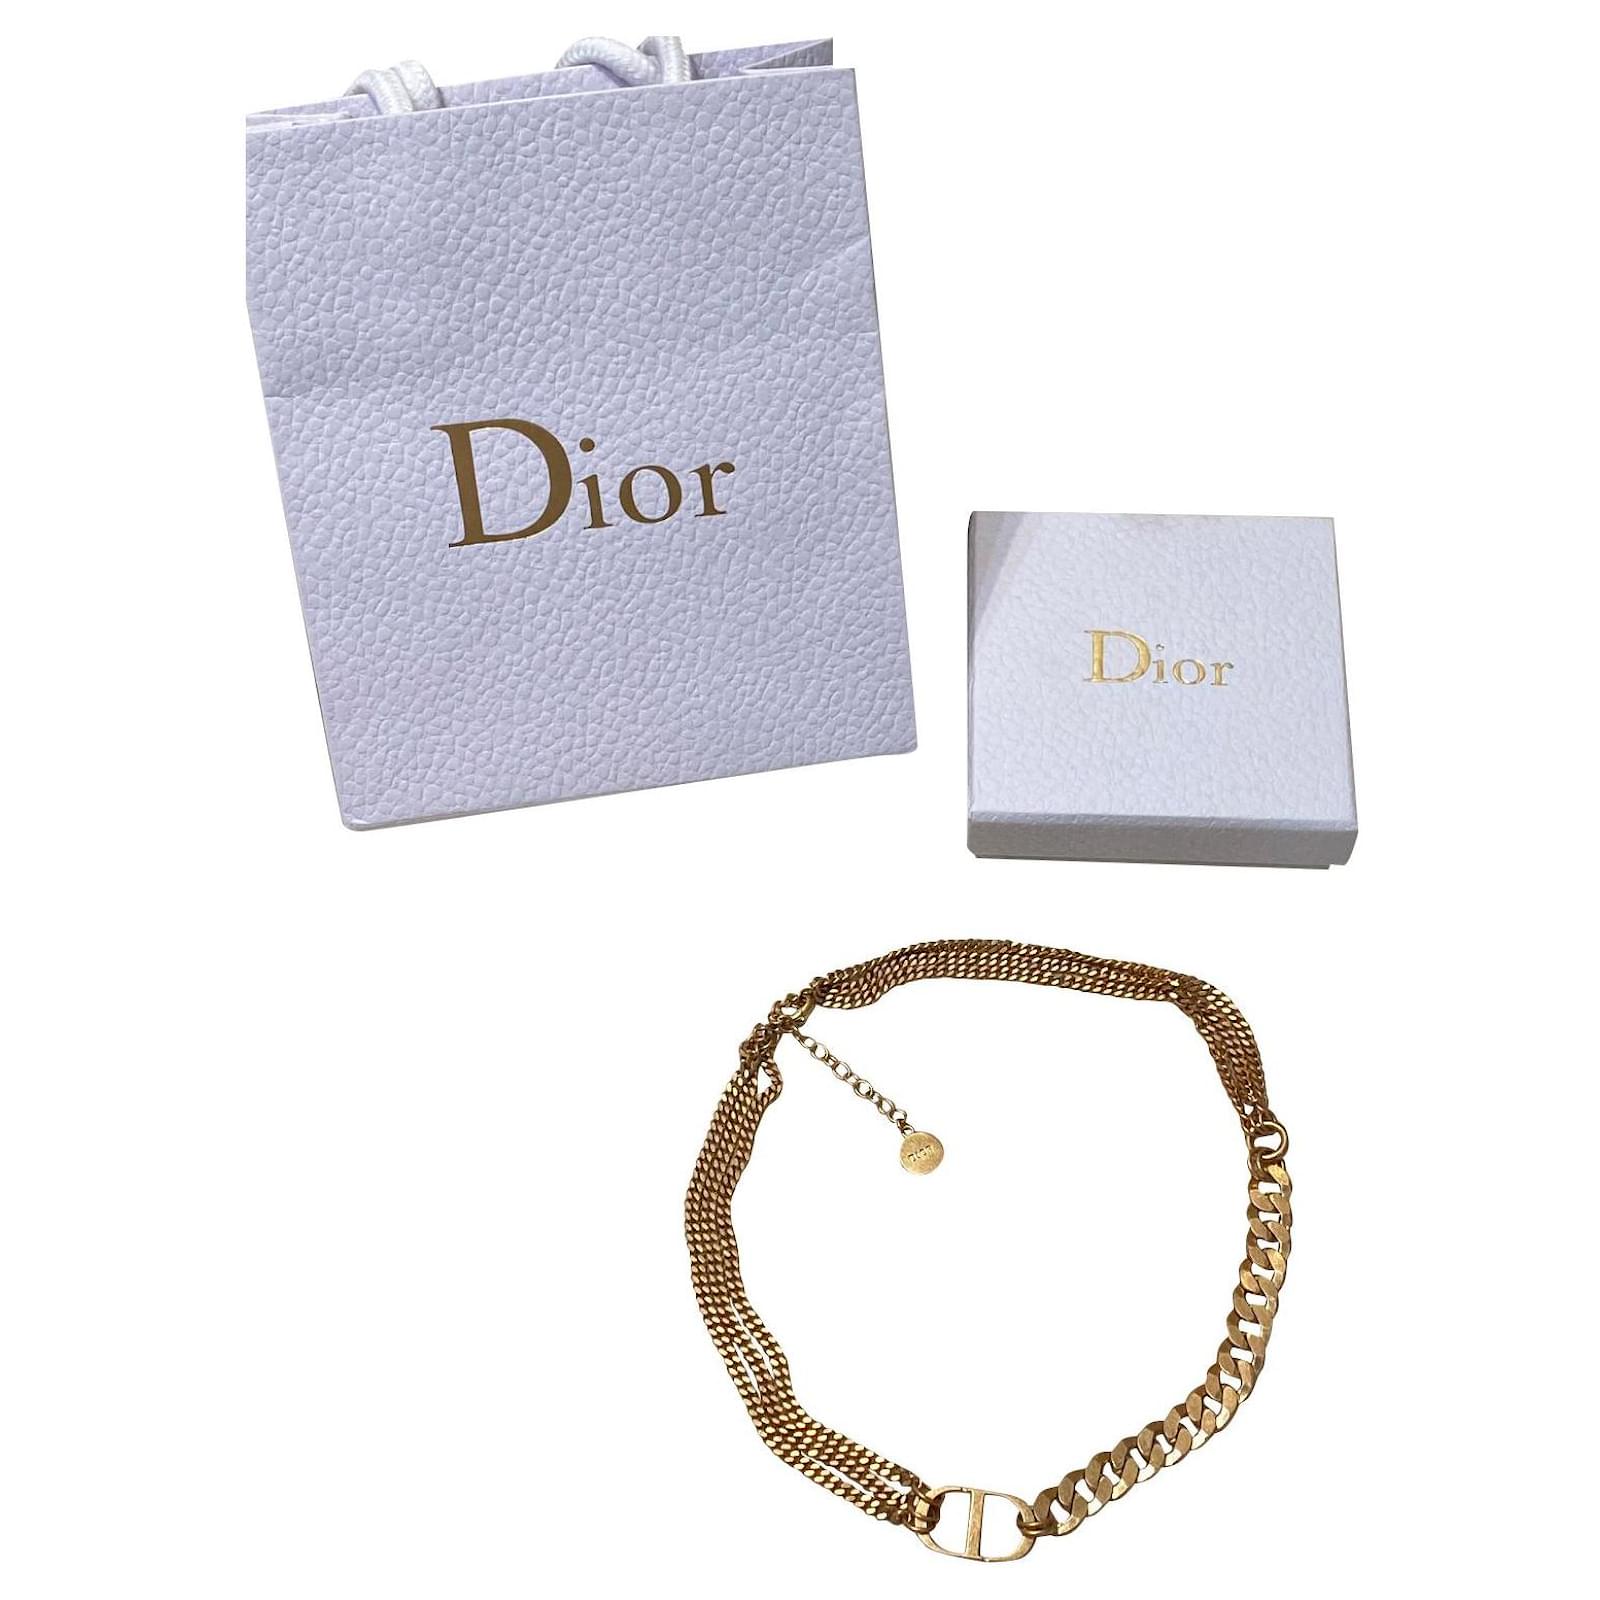 Christian Dior Dio(r)evolution Choker Necklace - Black, Palladium-Plated  Choker, Necklaces - CHR327762 | The RealReal